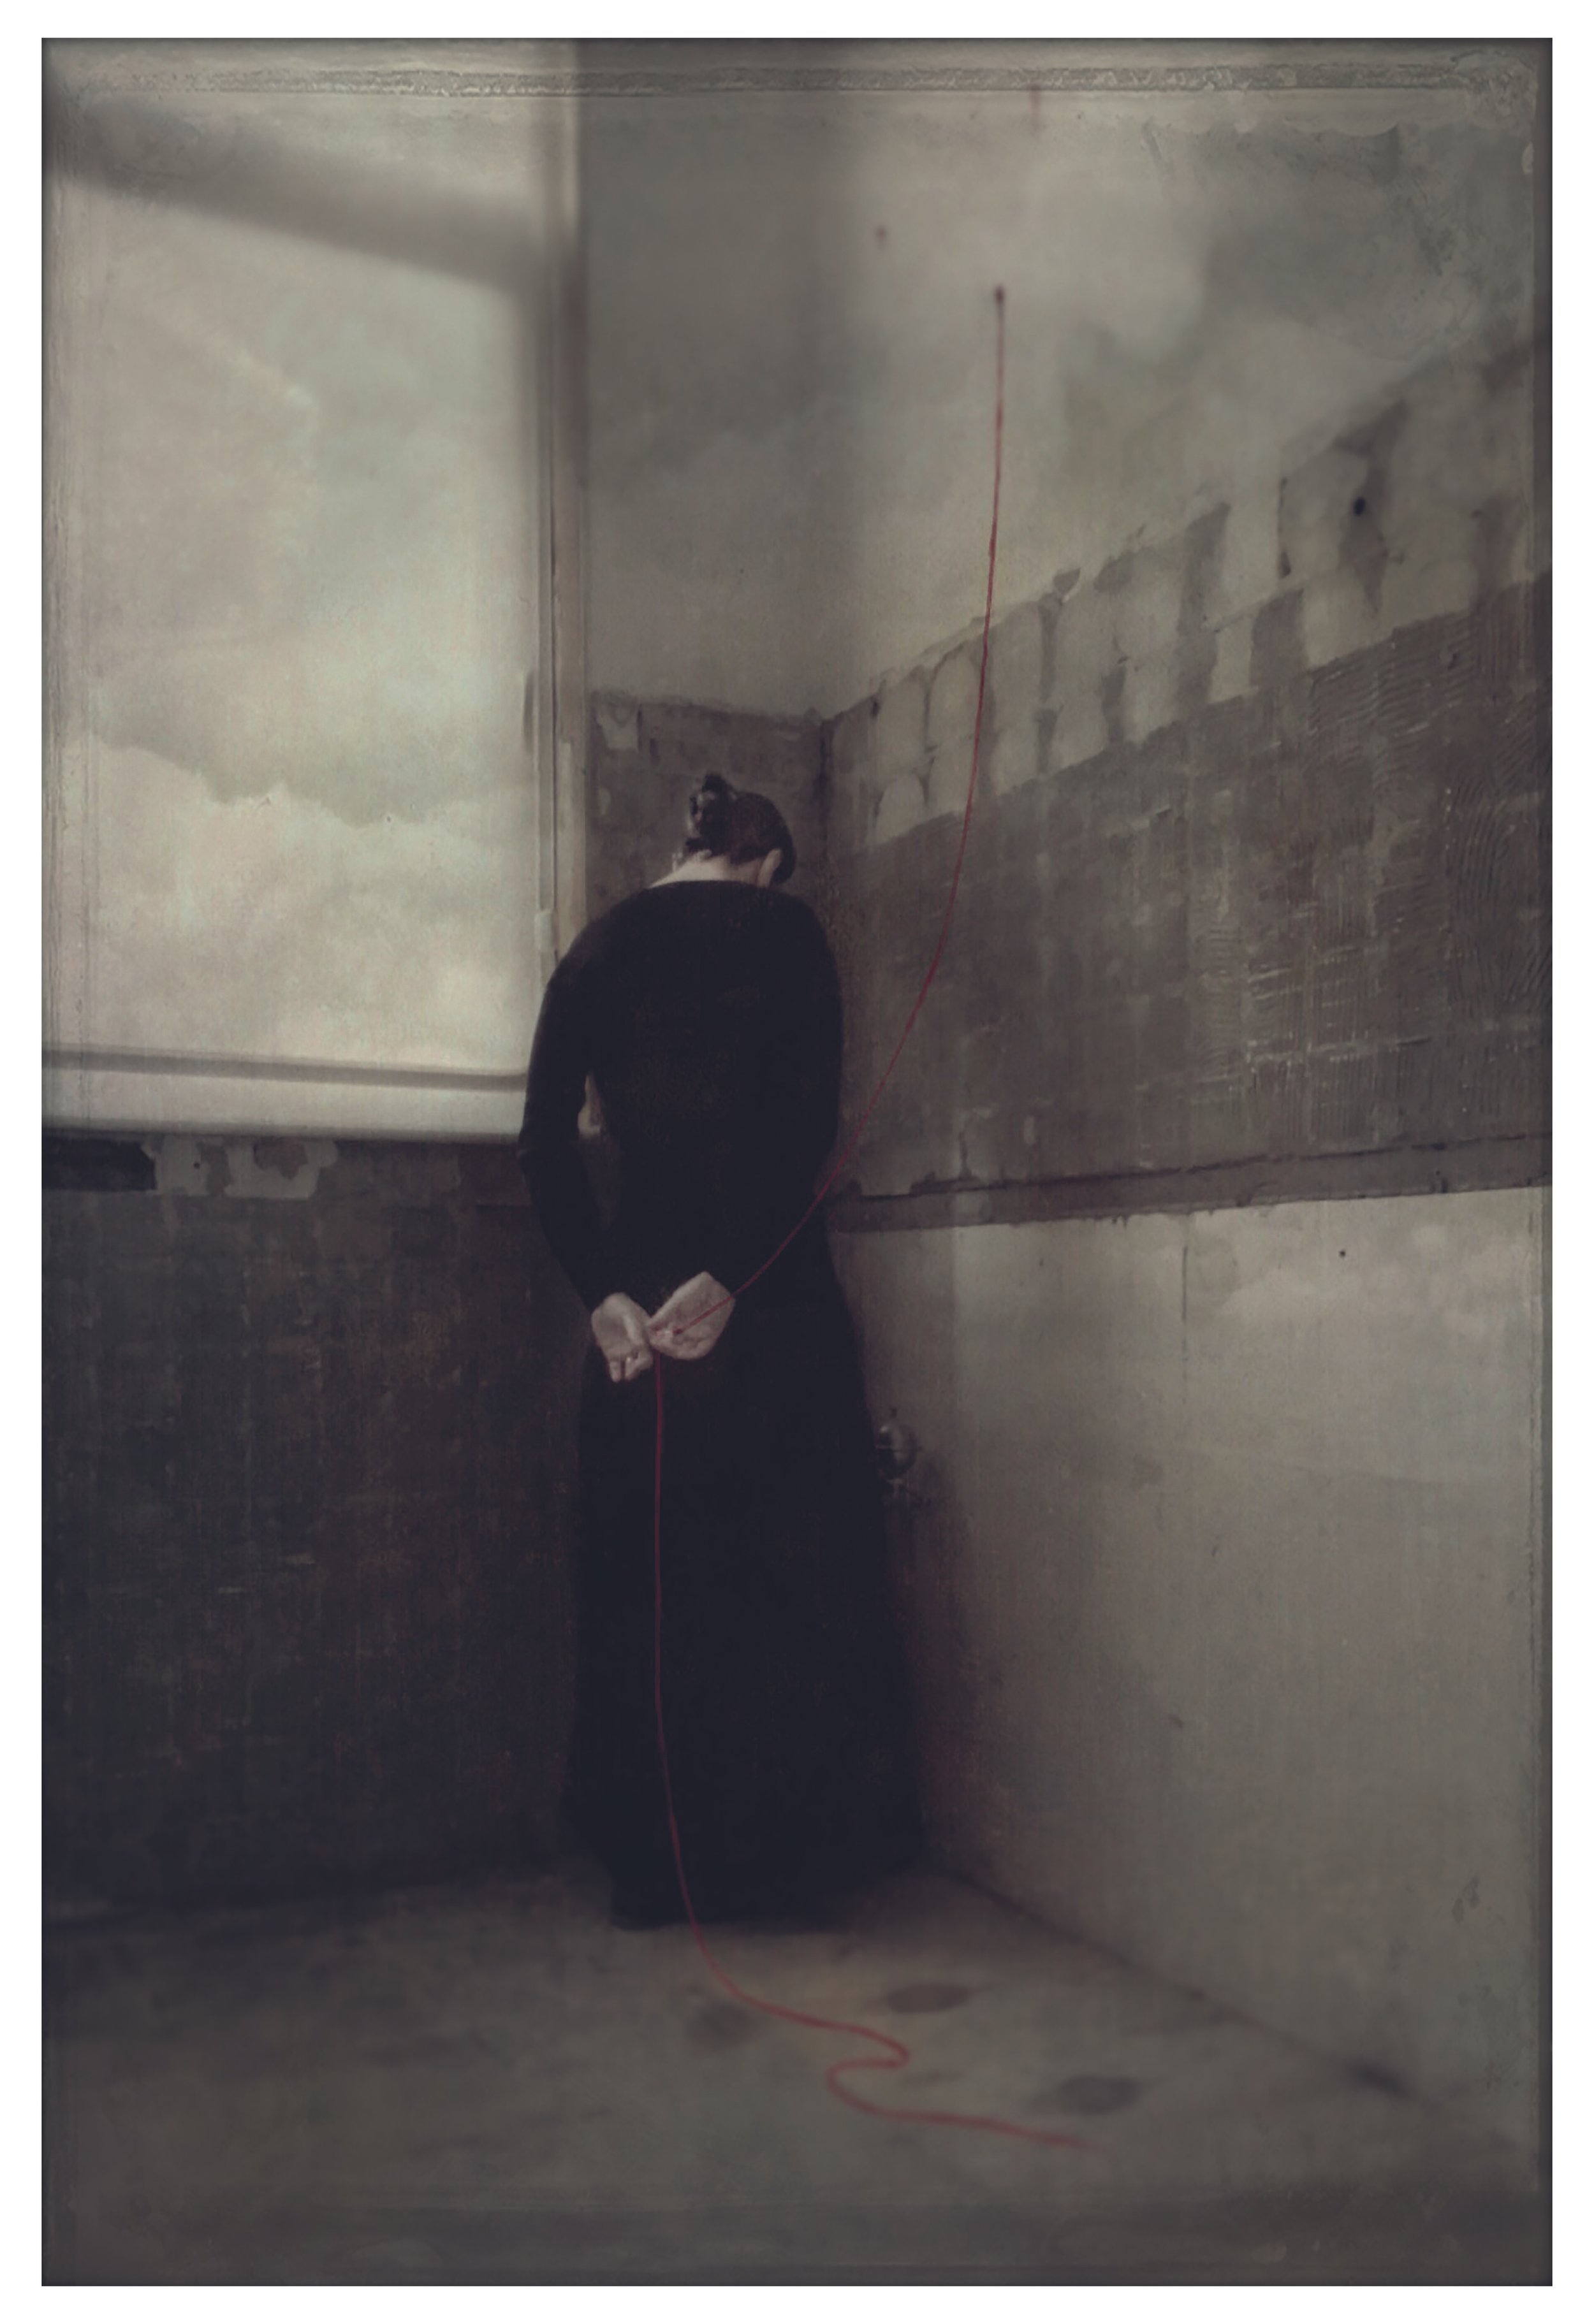 The Punishment, from the series Dancing with Demons, Ana Priscila Rodriguez cmyk HD.jpg